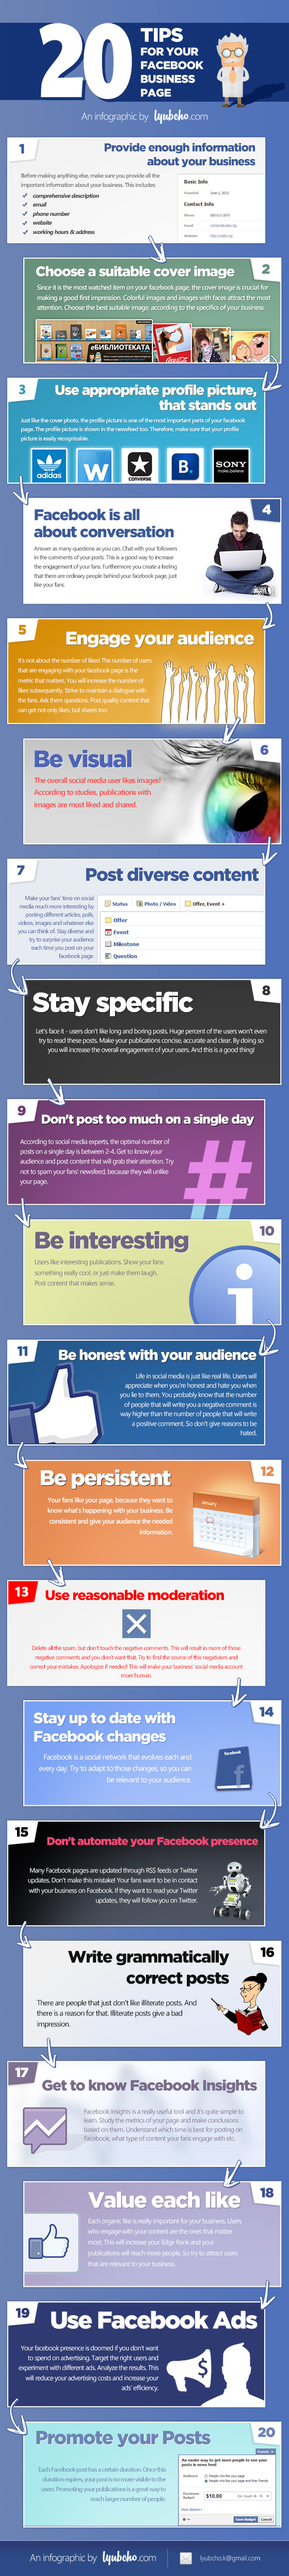 20 Facebook Tips to Enhance Your Page Presence [Infographic]